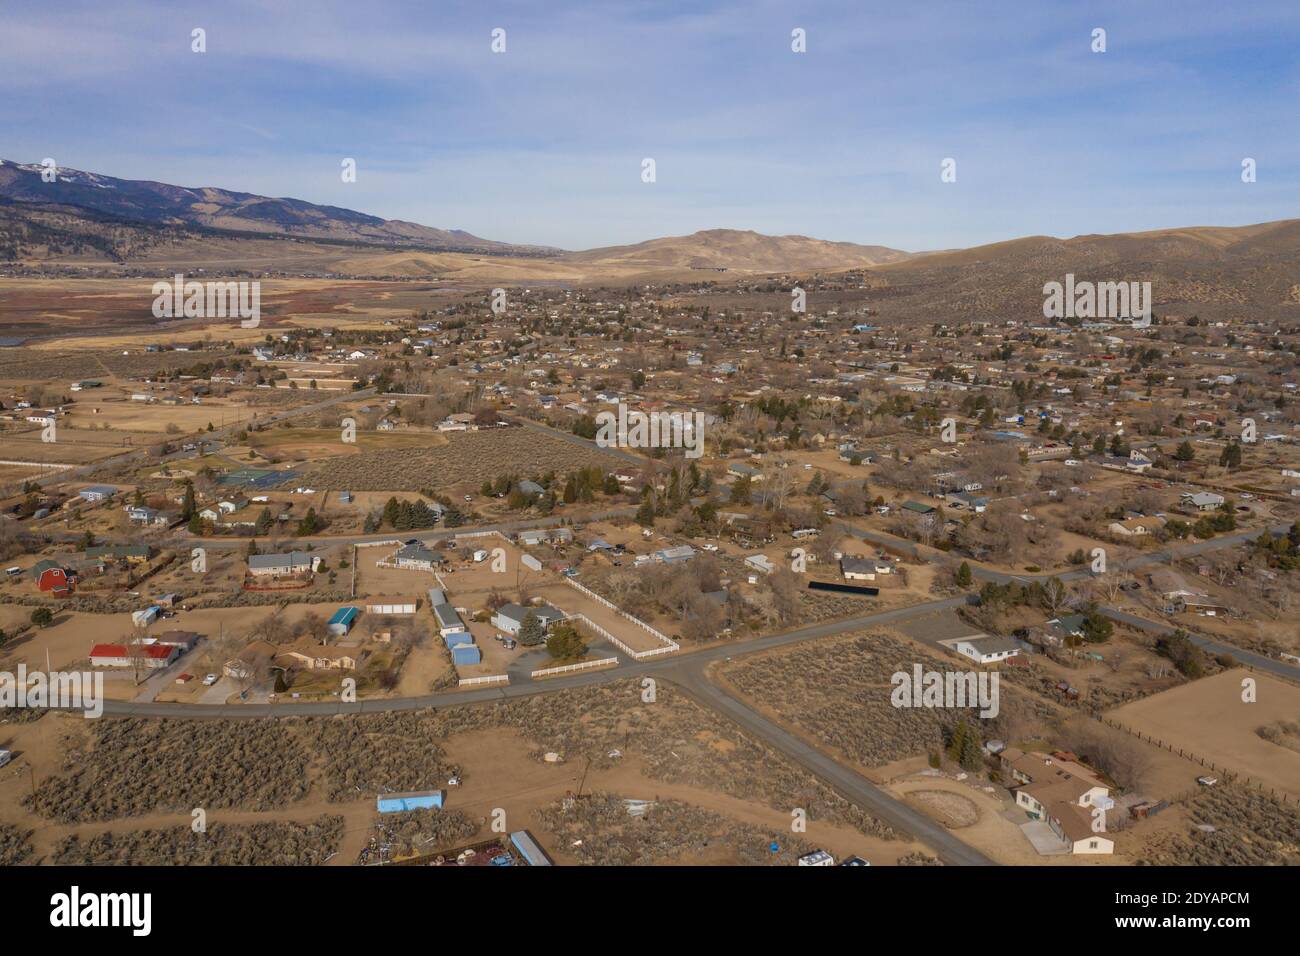 NEW WASHOE CITY, NEVADA, UNITED STATES - Dec 24, 2020: Homes sit on spacious residential parcels in the unincorporated community of New Washoe City. Stock Photo